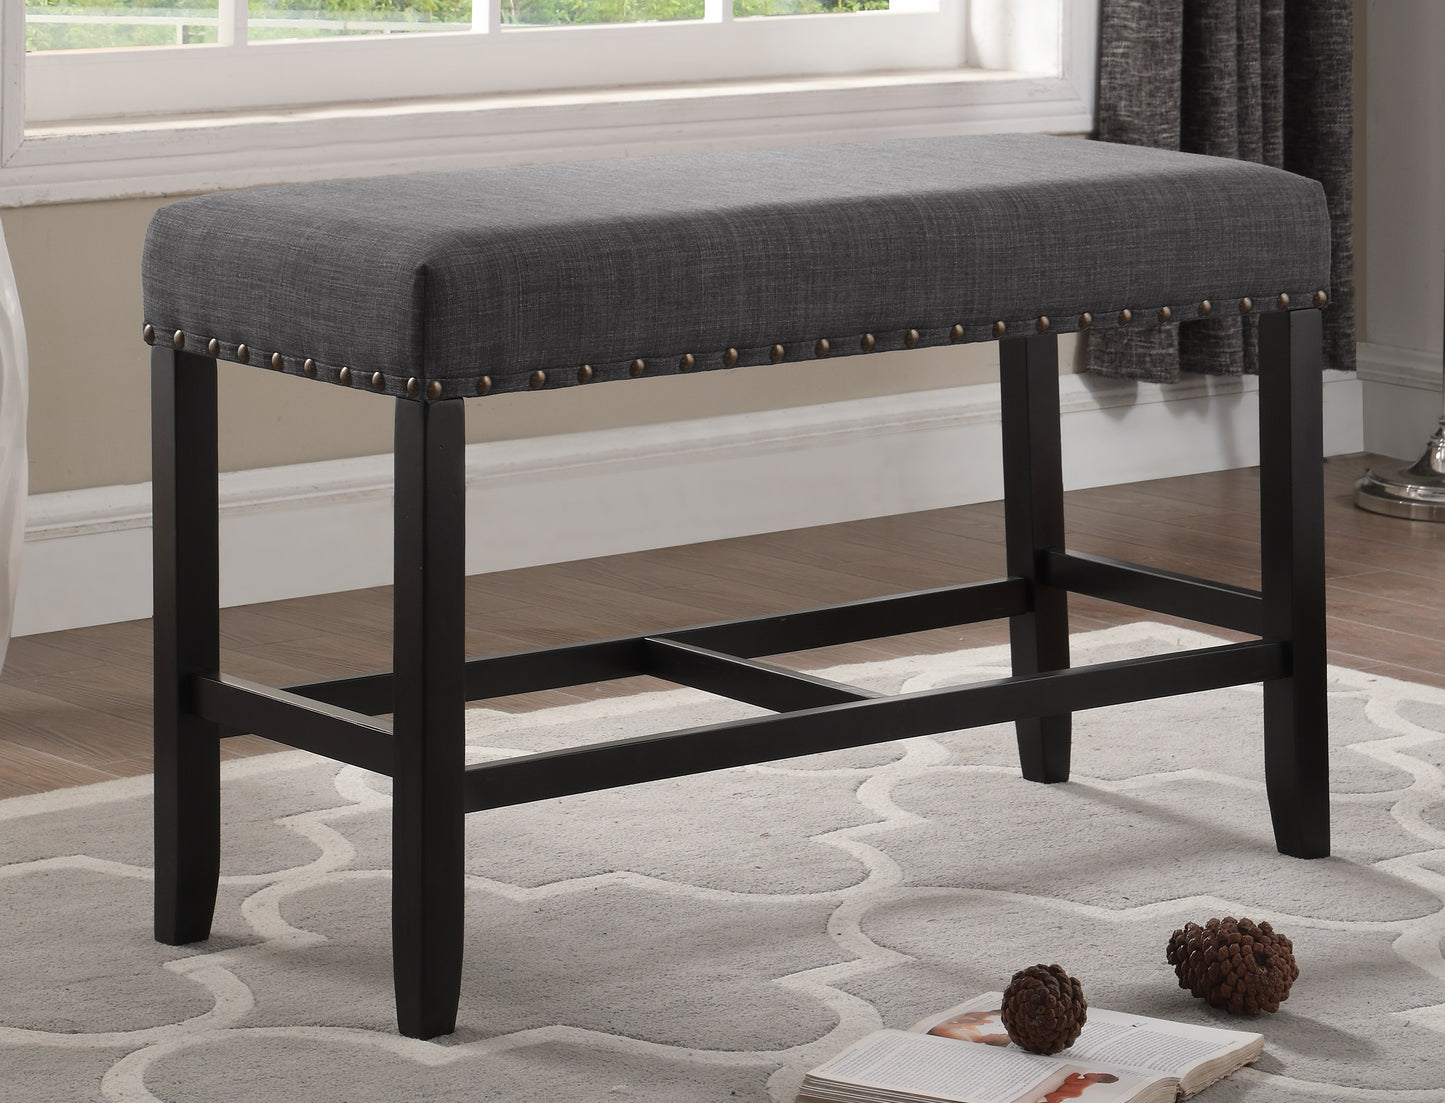 Biony Grey Fabric Counter Height Dining Bench with Nailhead Trim